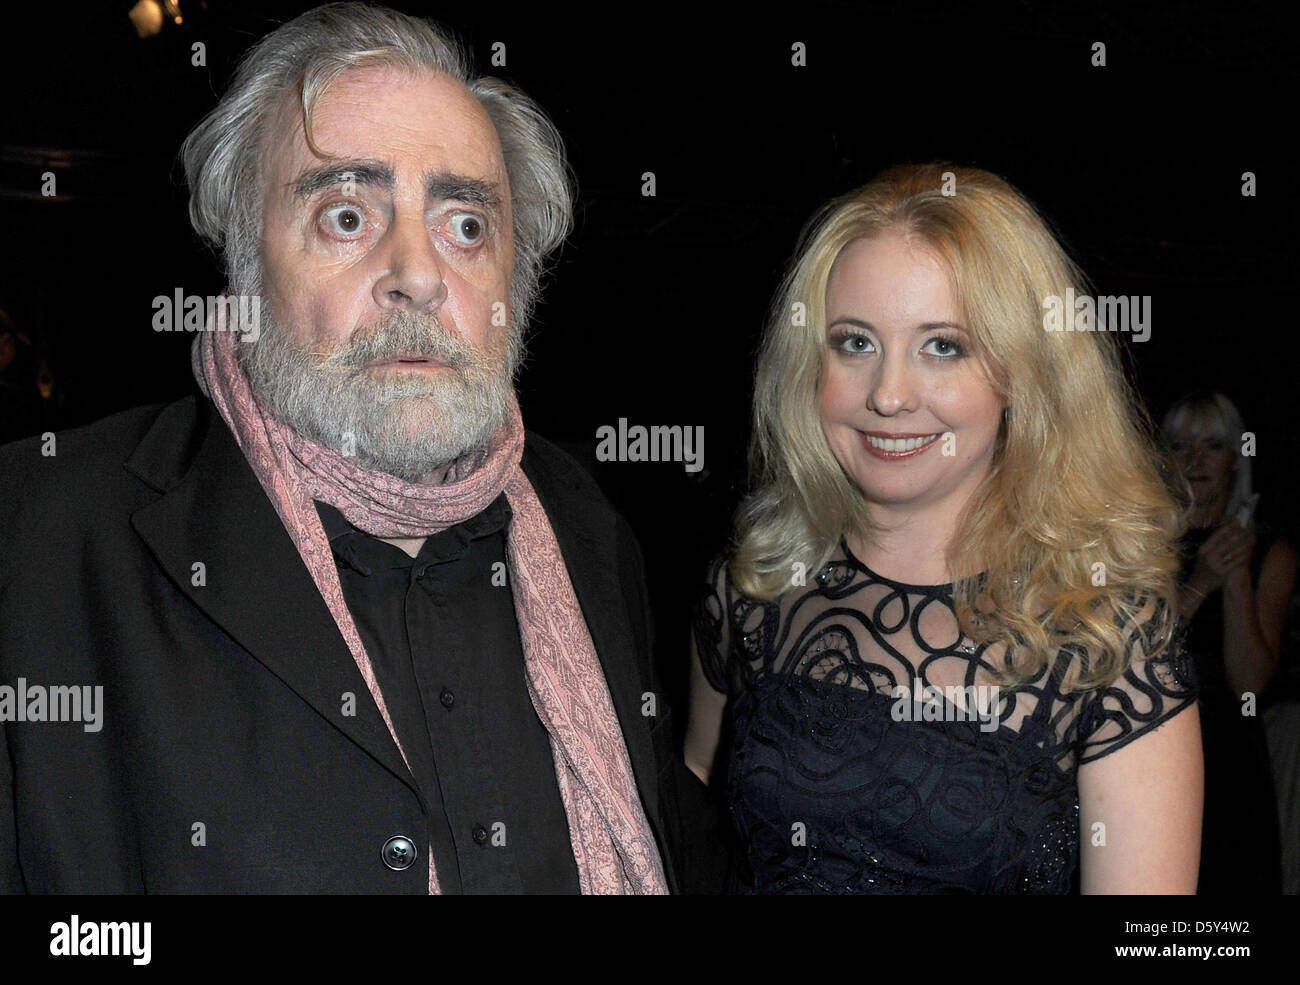 Actor Maximilian Schell and his partner Iva Mihanovic arrive at the launch party after the premiere of the theatre play 'Im Weissen Roessl' presented at Deutsches Theater in Munich, Germany, 11 October 2012. Photo: Ursula Dueren Stock Photo